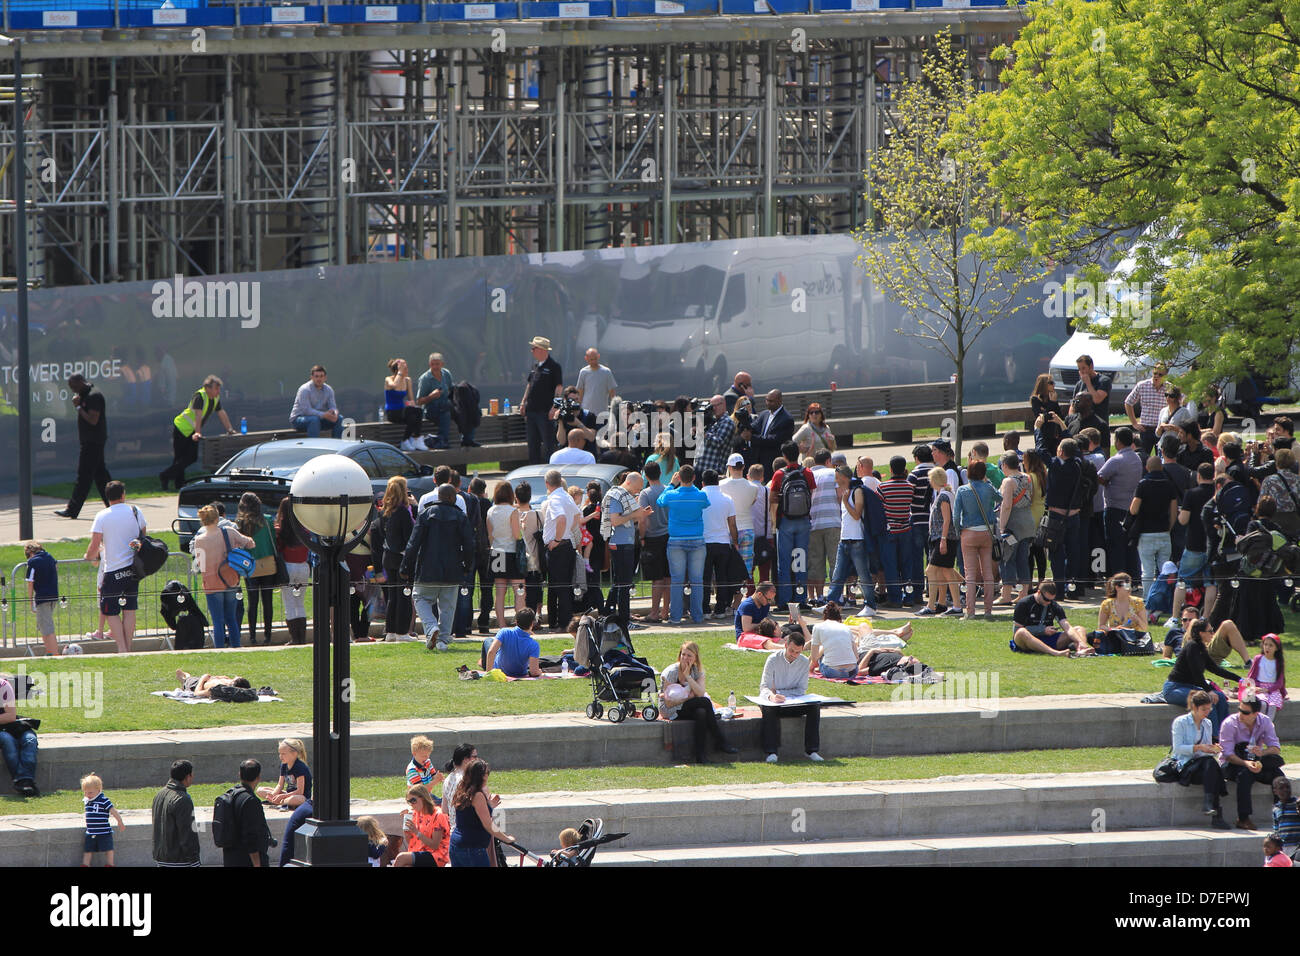 London, UK. 6th May, 2013. The Cast of Fast & Furious 6 promoting the new film at Potters Field, London. Stock Photo